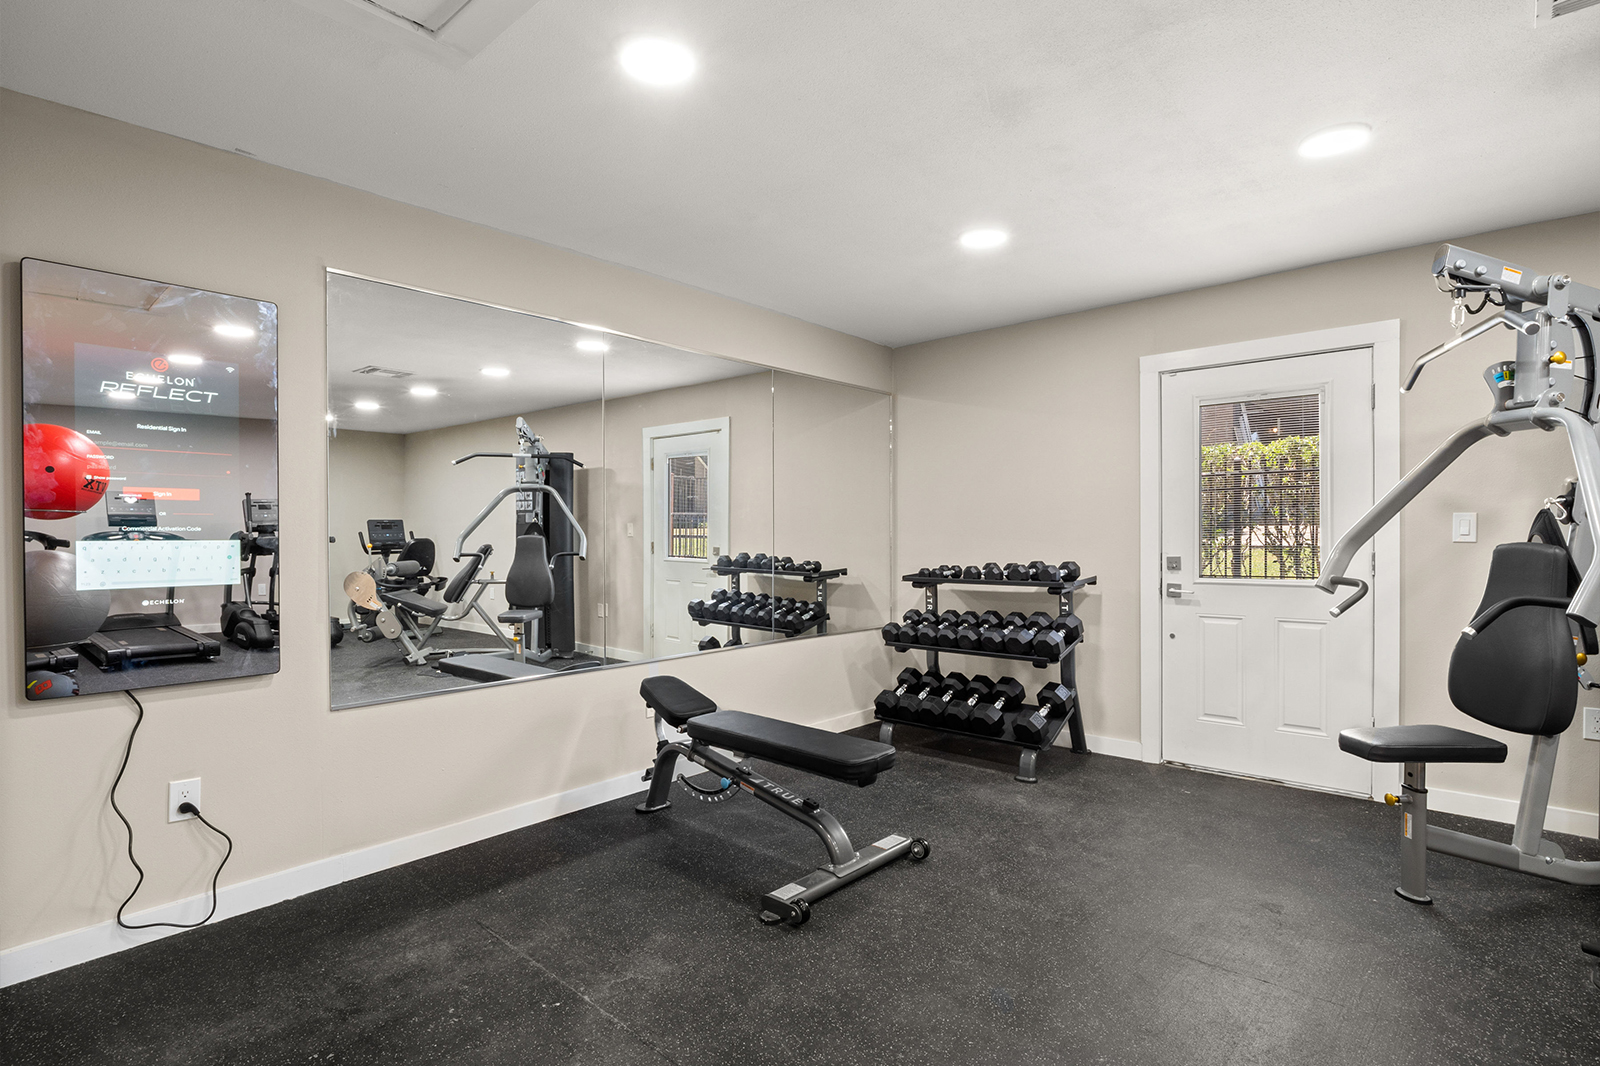 equipment and mirrors in the fitness center